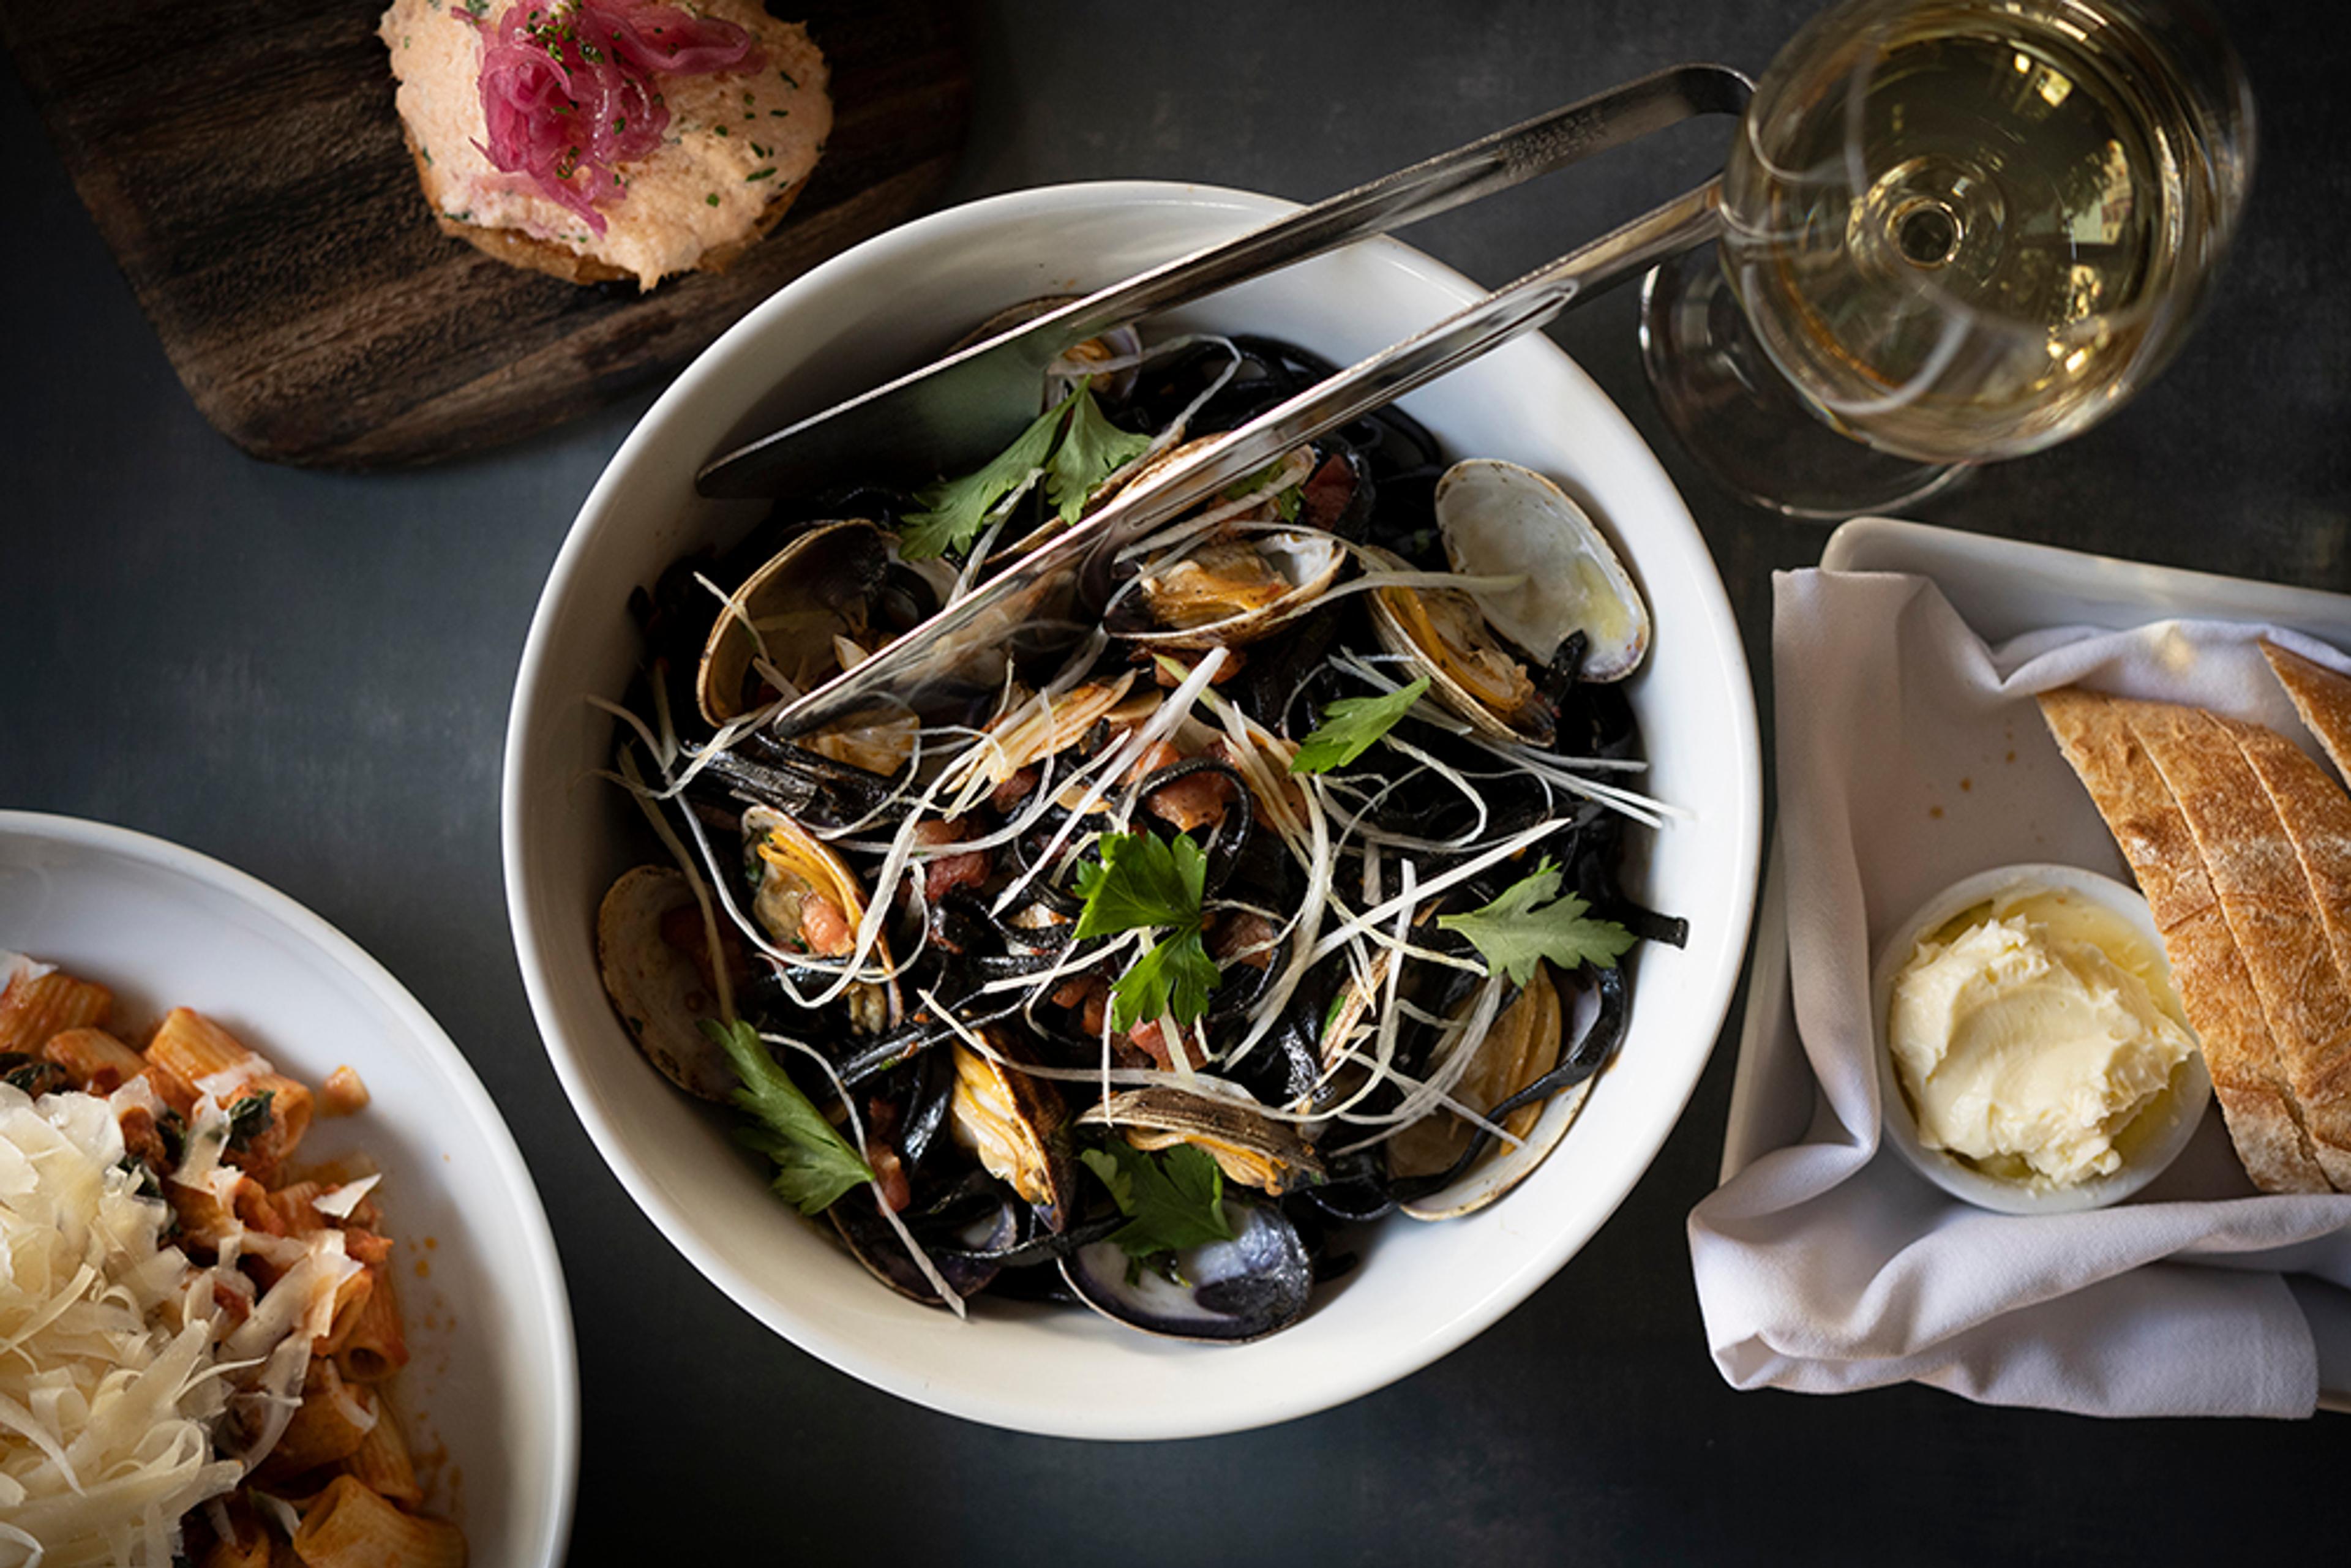 squid ink pasta with clams